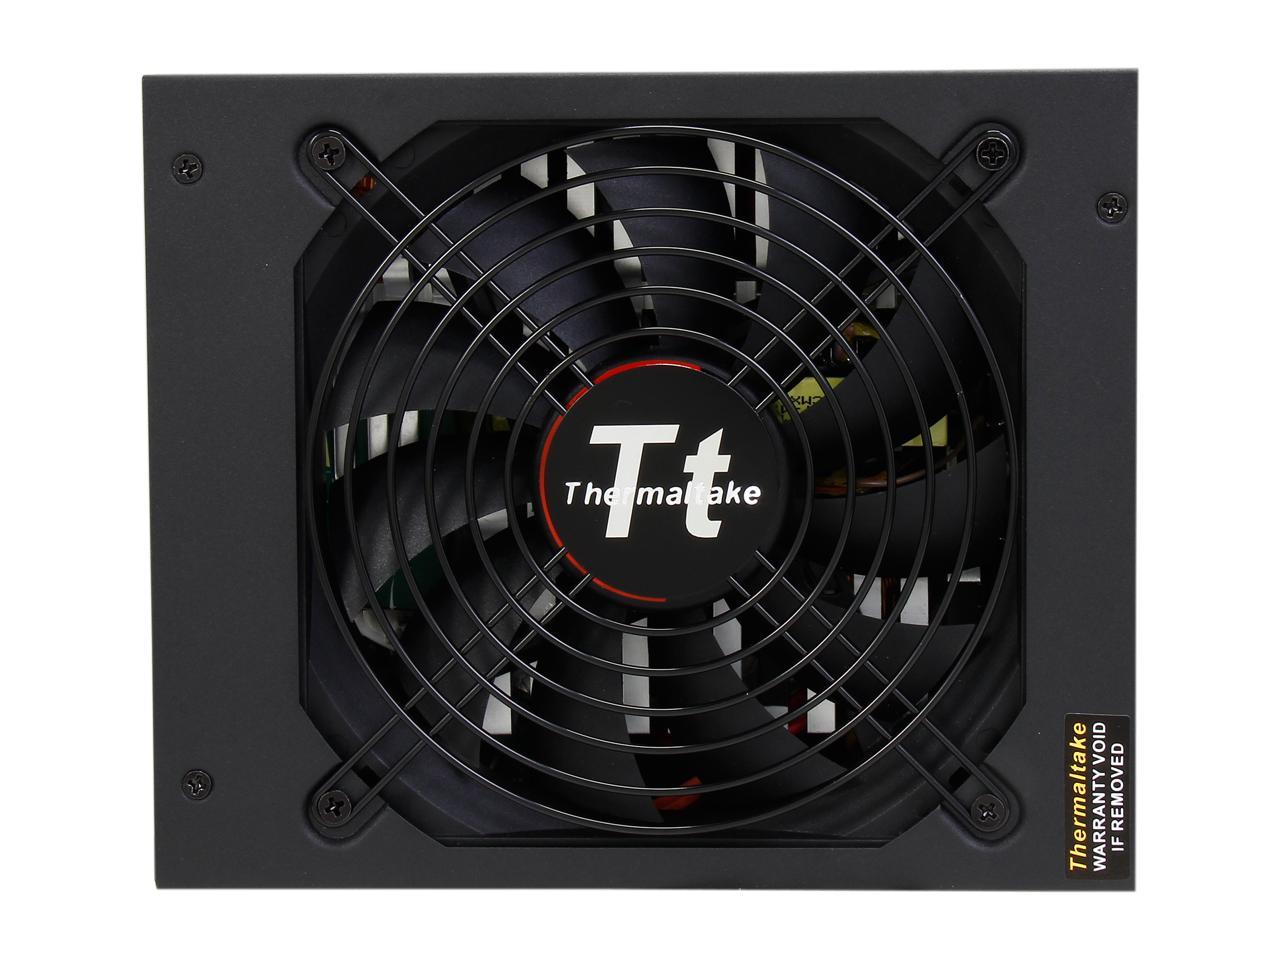 Thermaltake Toughpower 1200W Gold PS-TPD-1200MPCGUS-1 1200W ATX12V / EPS12V 80 PLUS GOLD Certified Semi-Modular Active PFC Power Supply